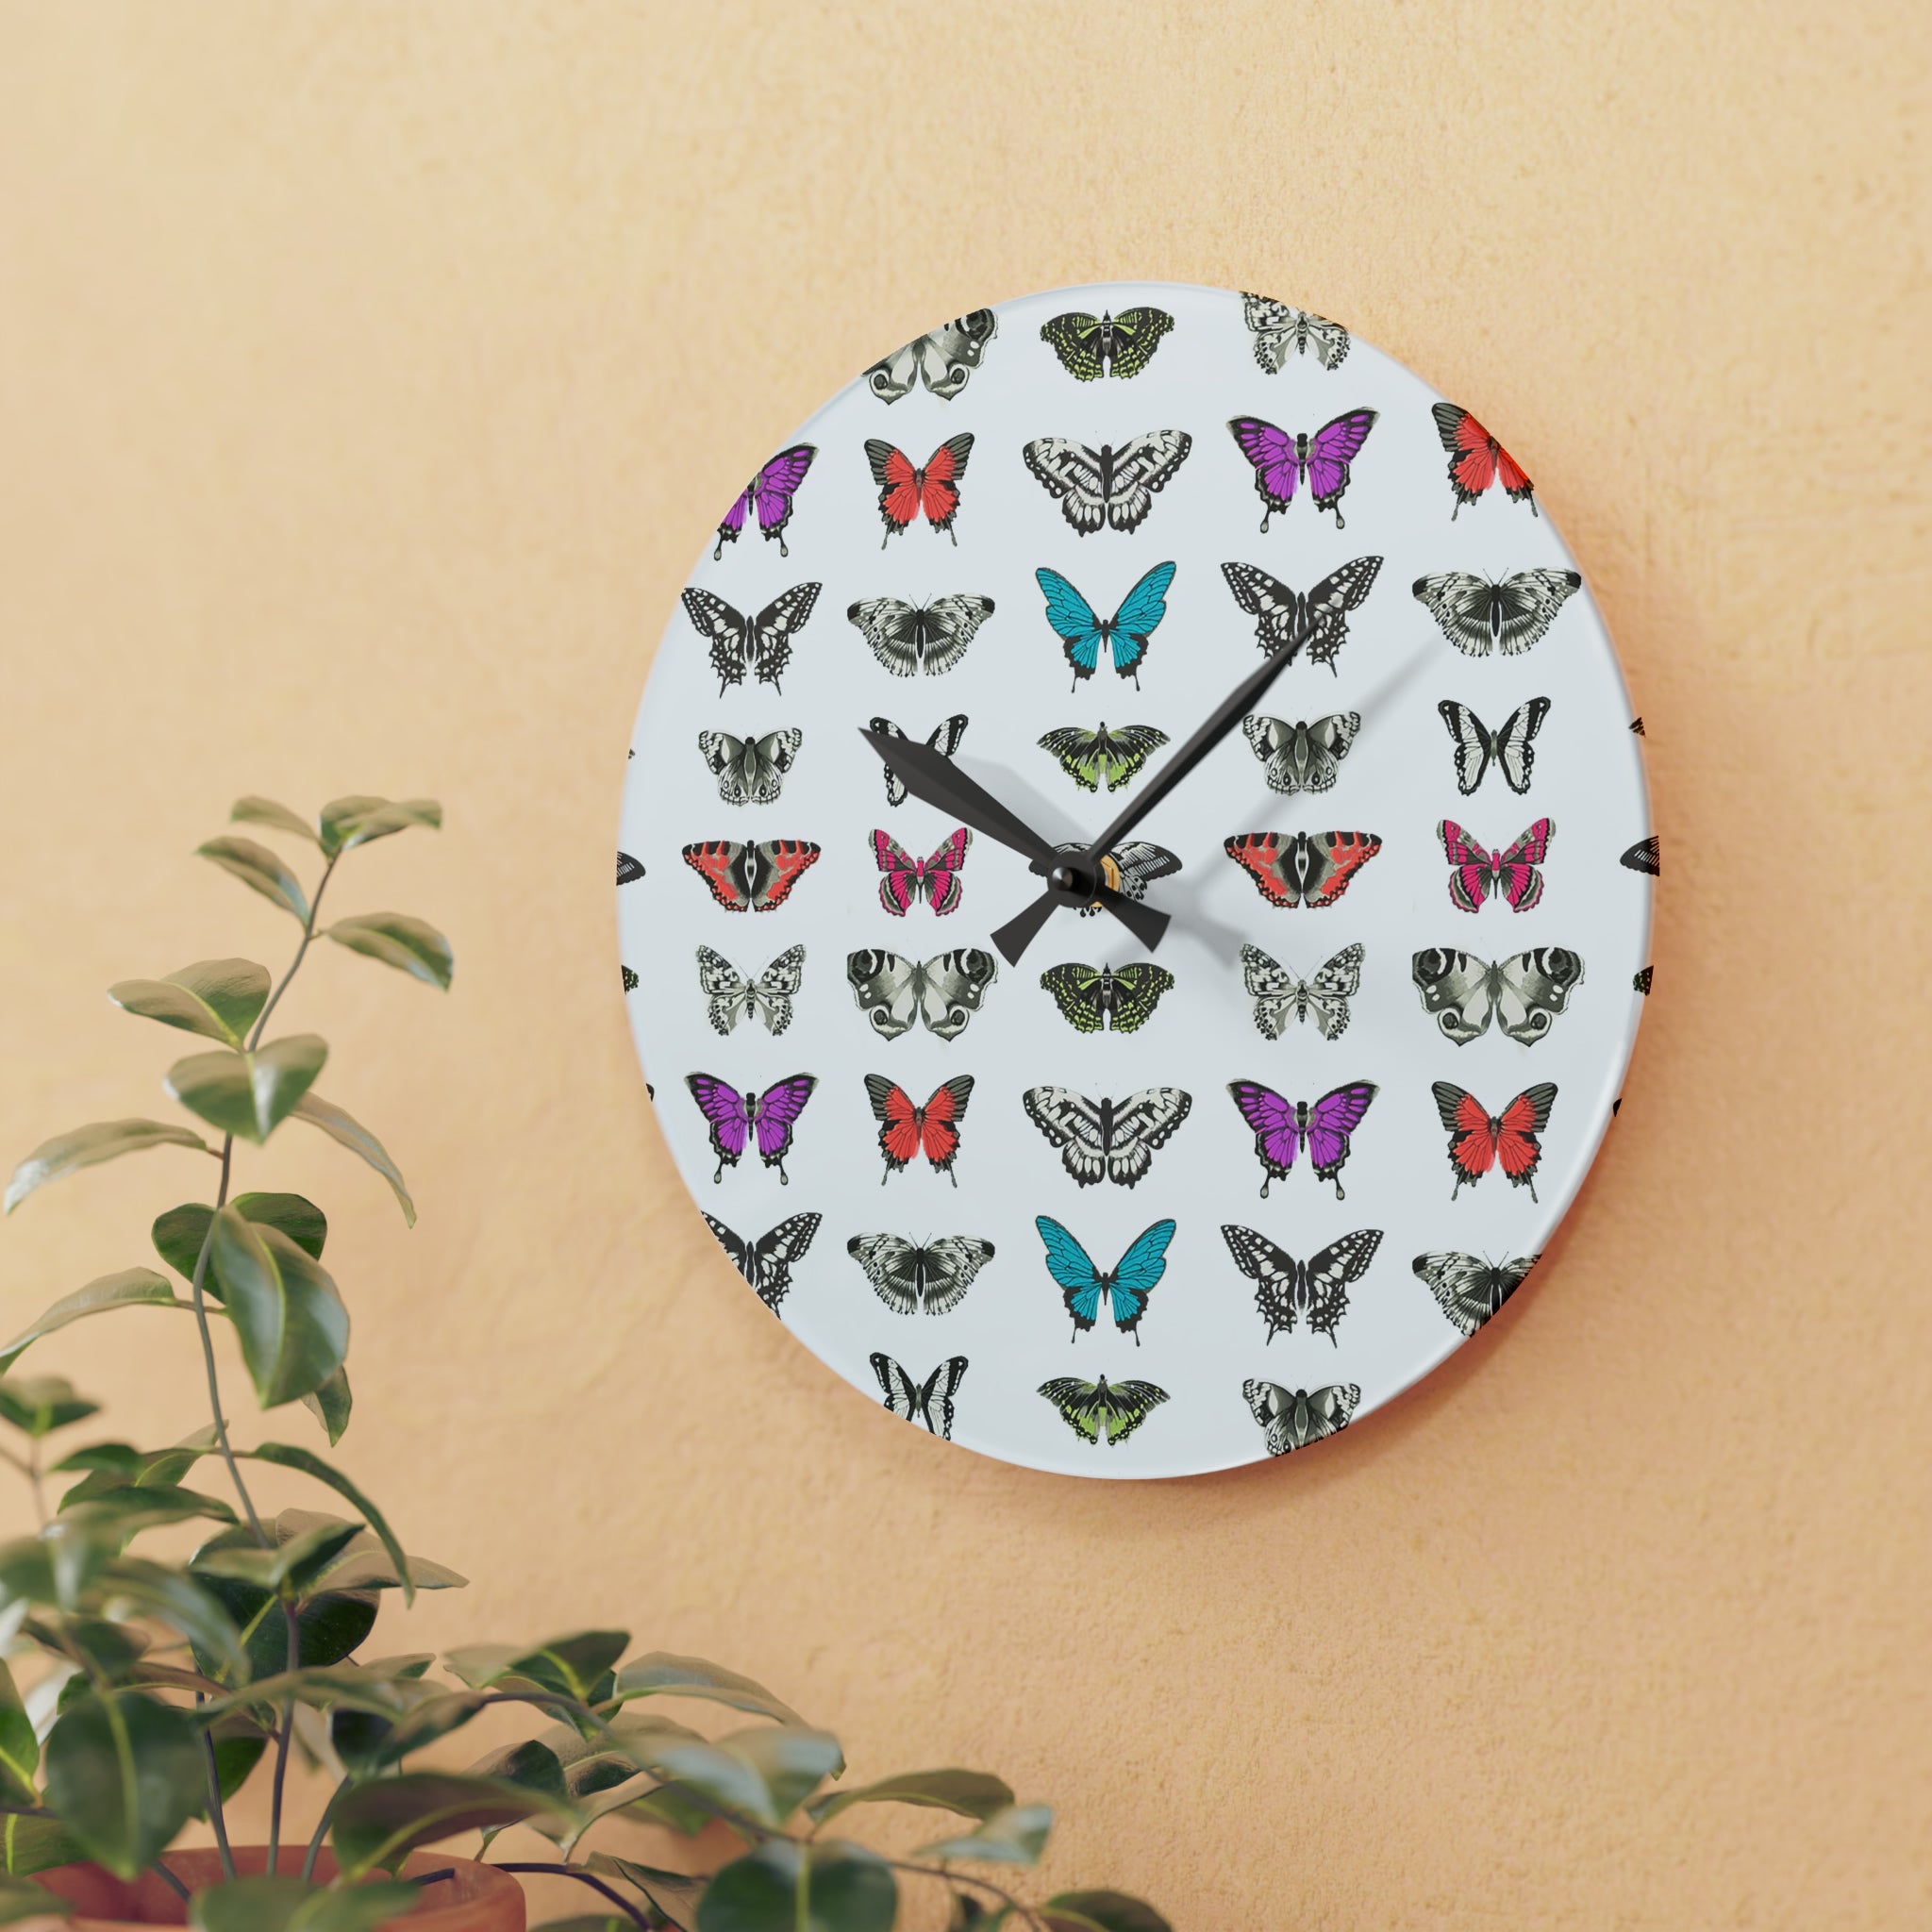 Butterfly and Moth Acrylic Wall Clock